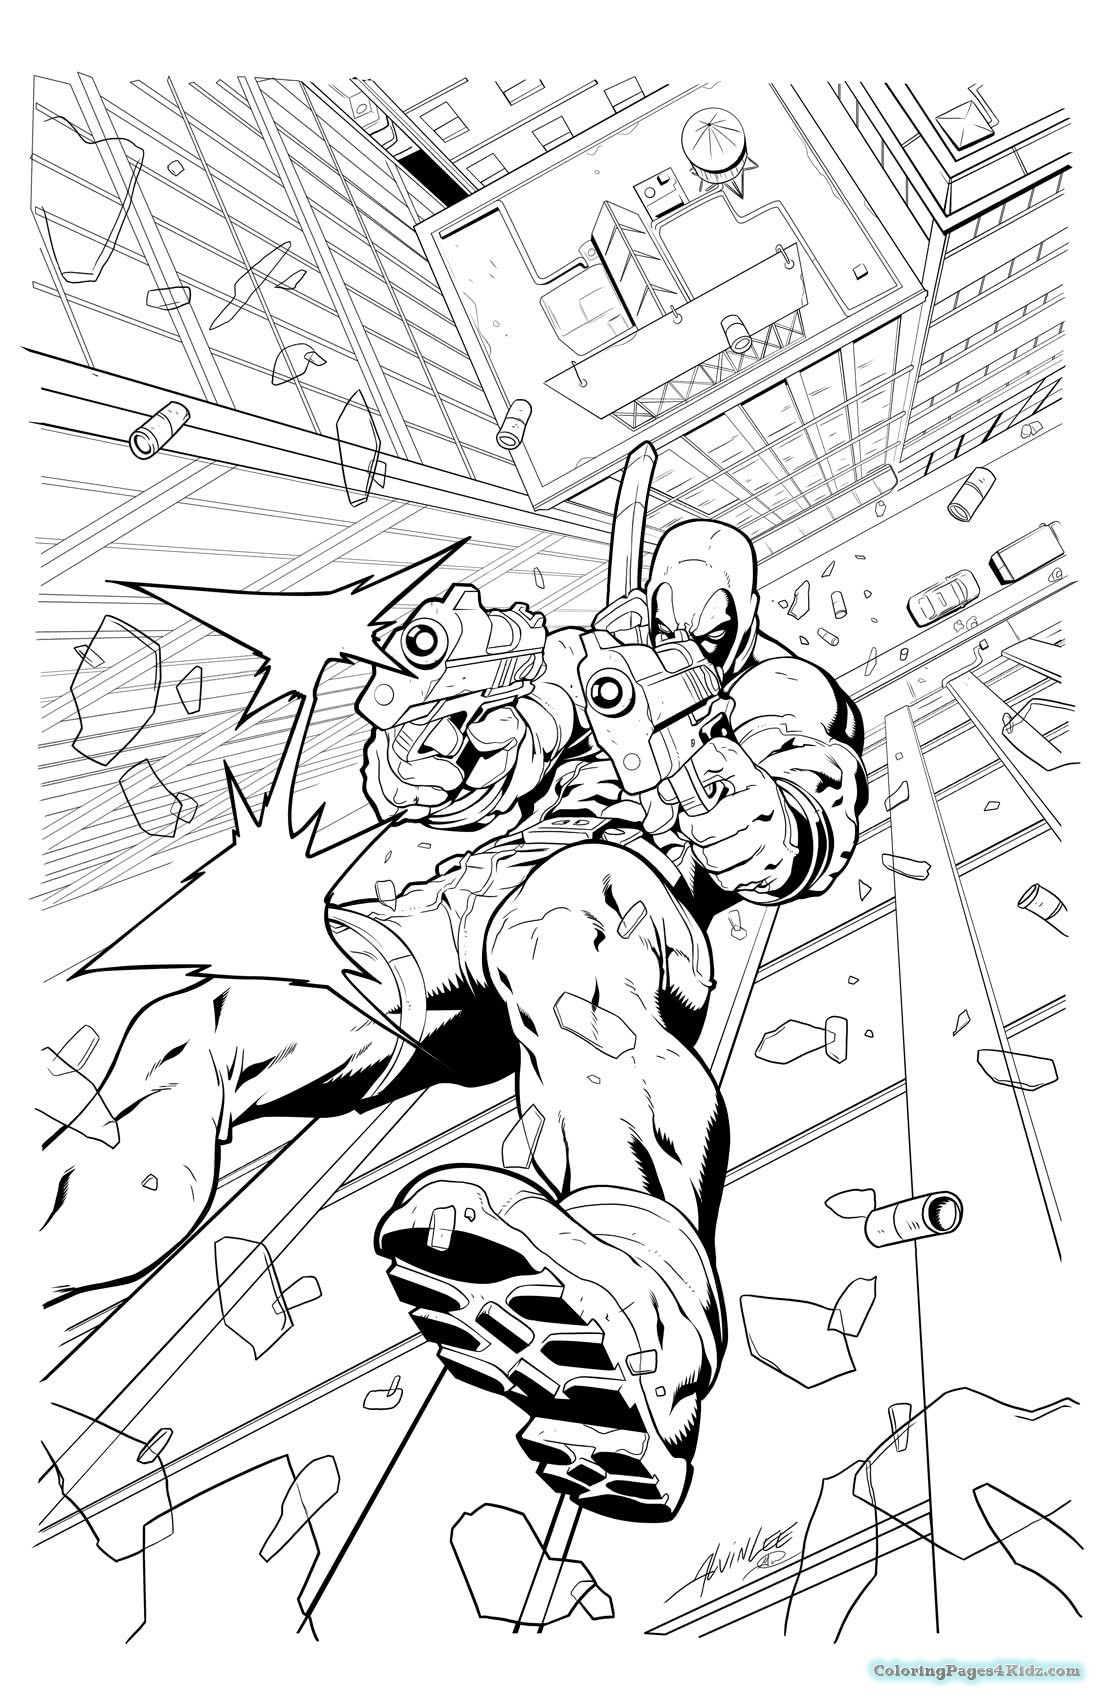 Deadpool Coloring Pages For Kids
 Legp Deadpool Coloring Pages